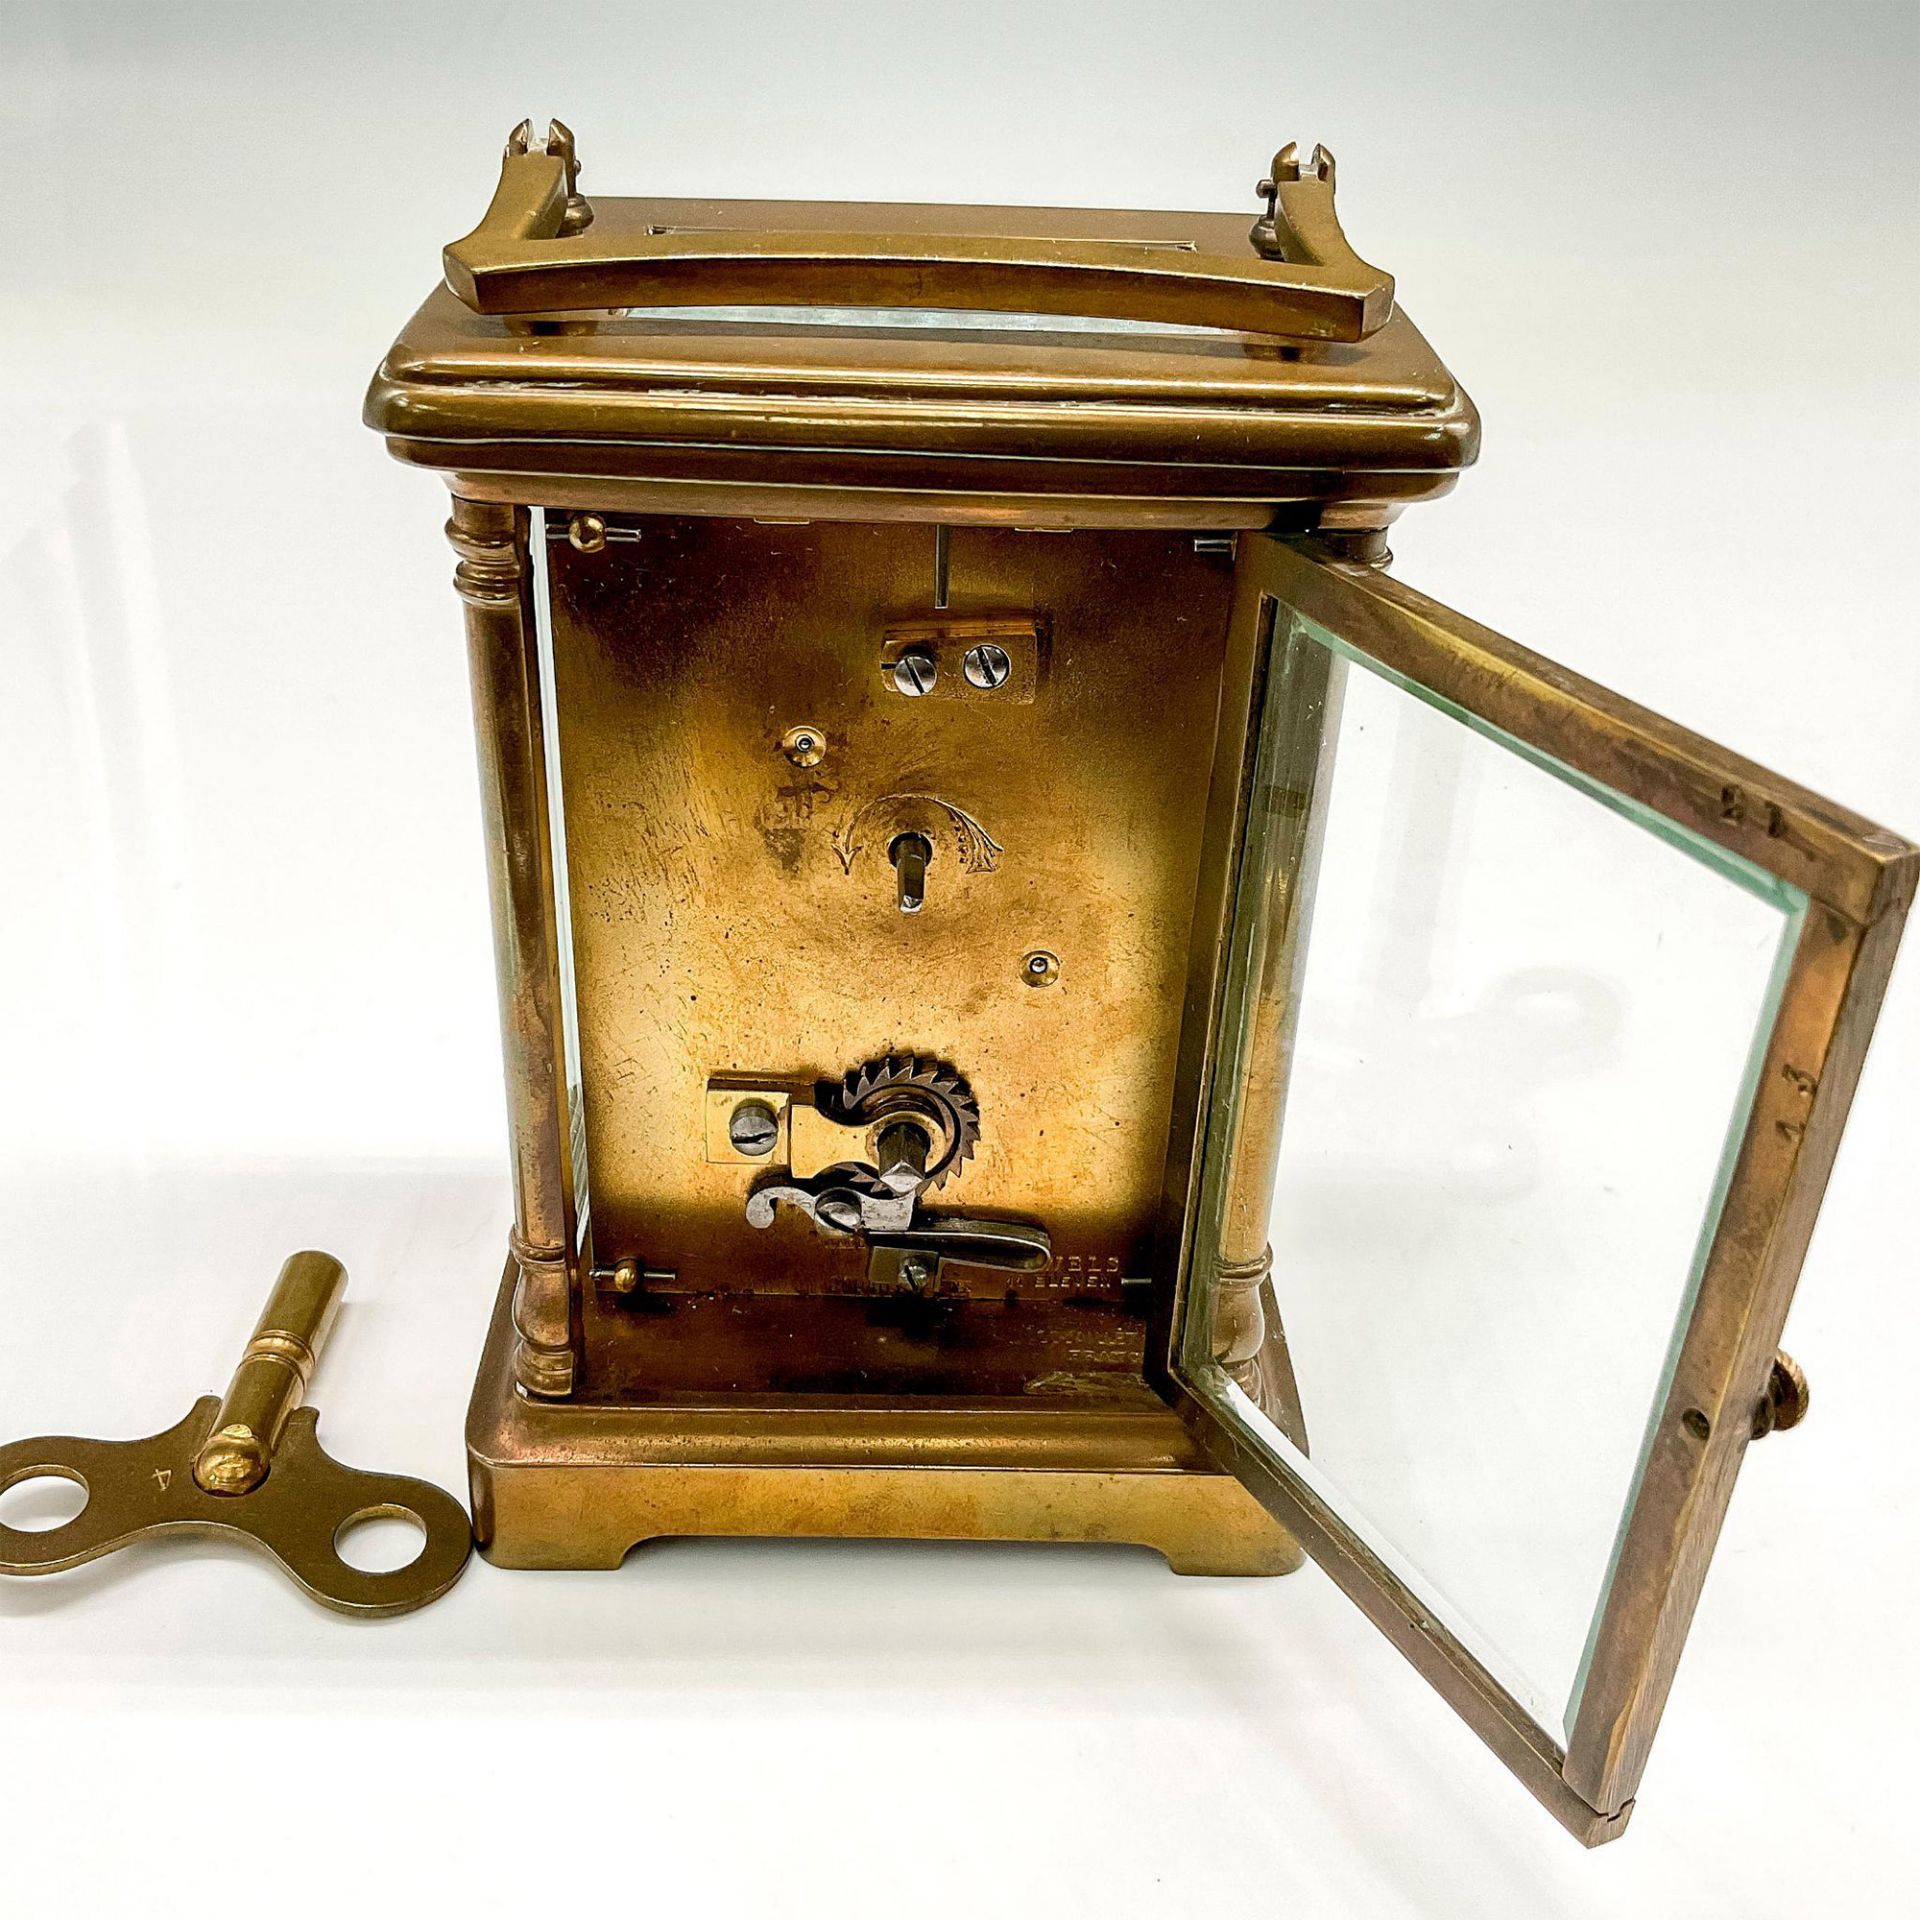 Tiffany & Co. by Couaillet Fres Brass Carriage Clock - Image 3 of 3